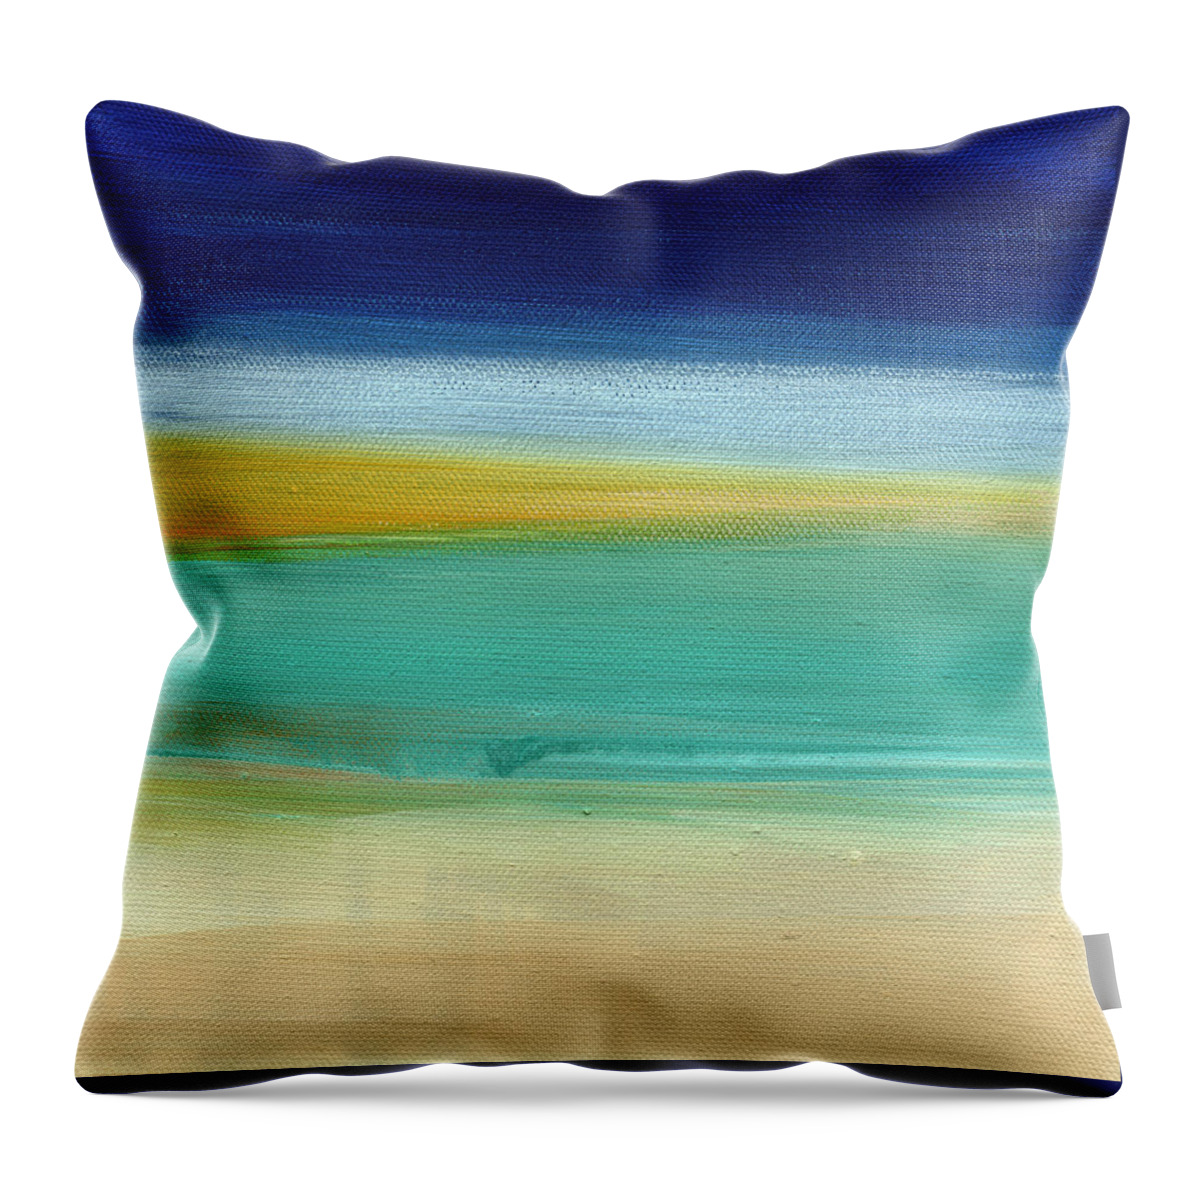 Abstract Throw Pillow featuring the painting Ocean Blue 3- Art by Linda Woods by Linda Woods